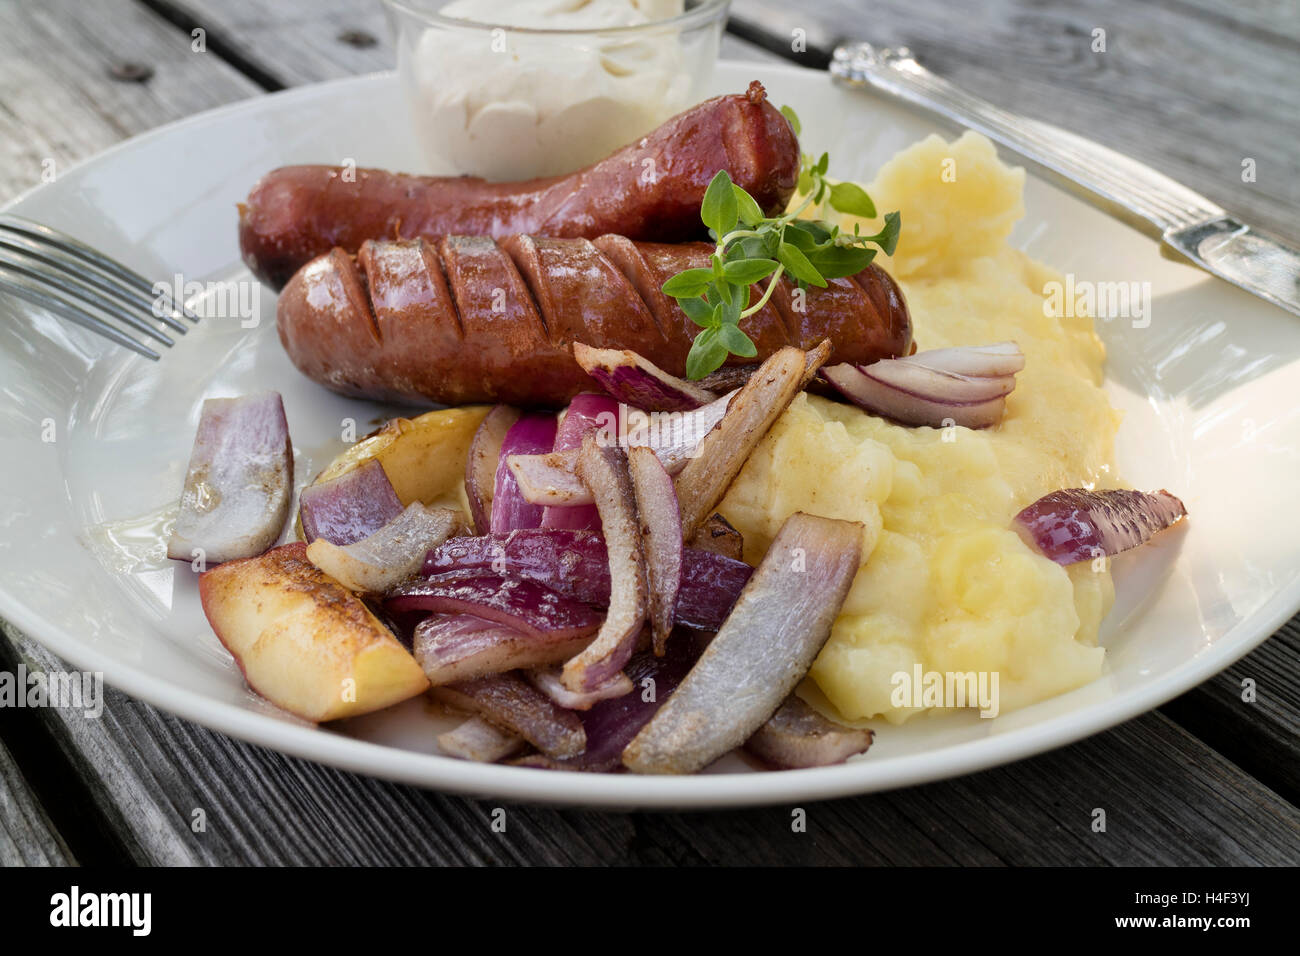 Traditional swedish lunch with sausages, mashed potatoes, apple and onions Stock Photo